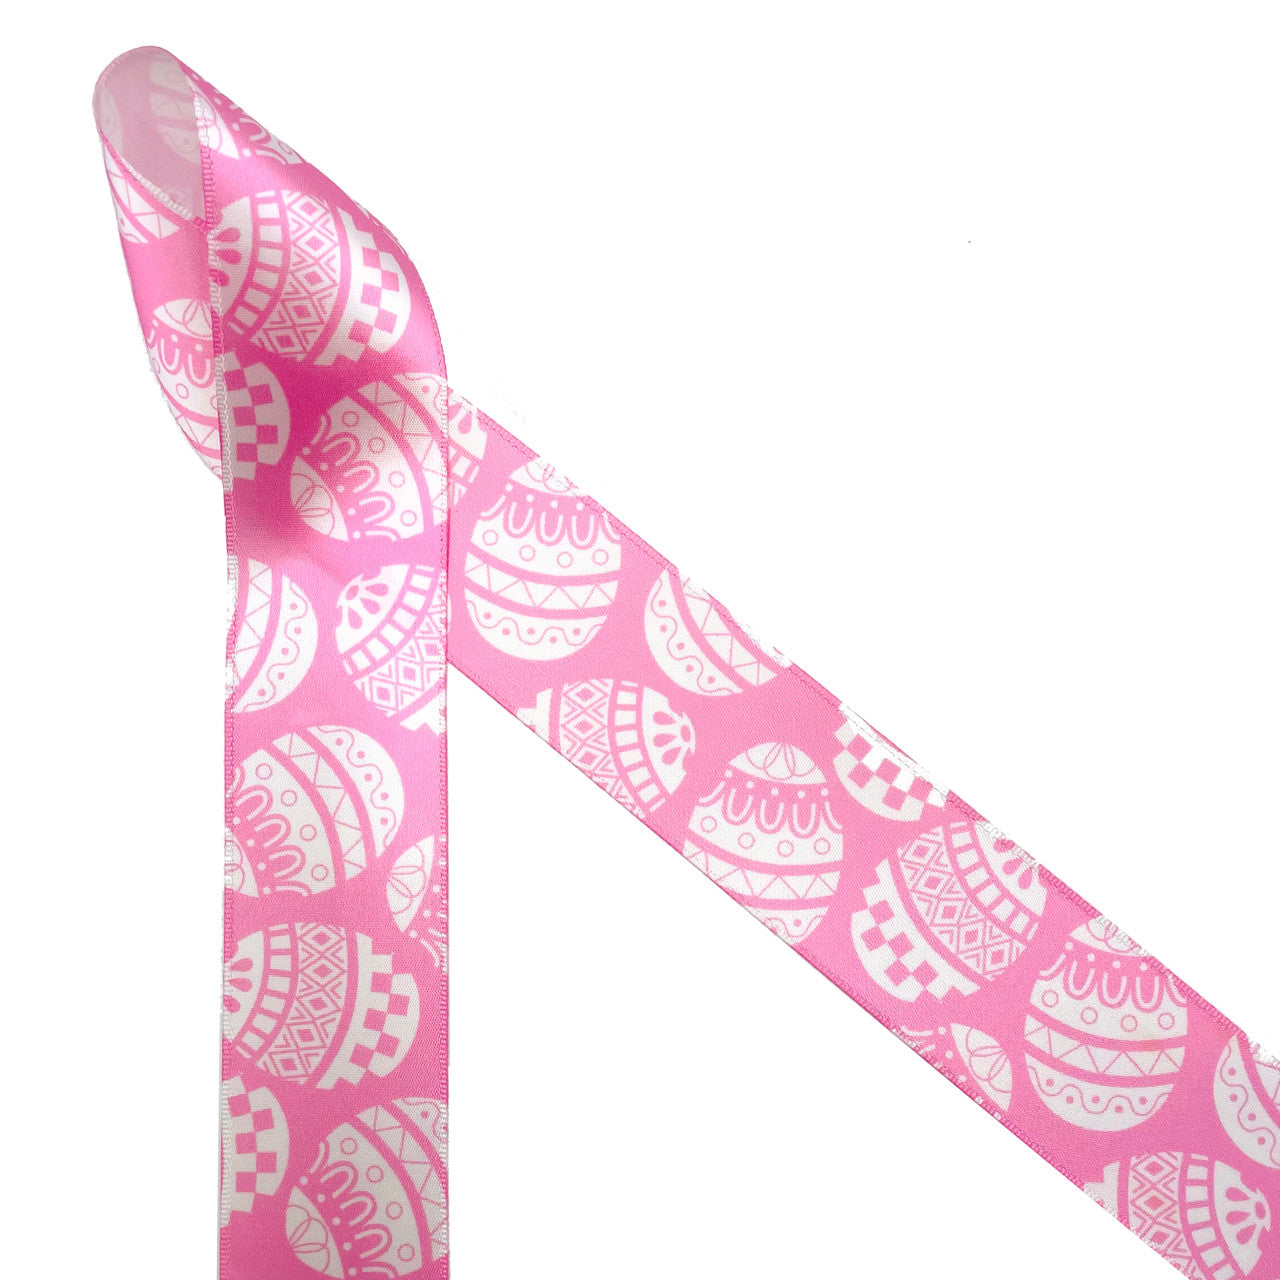 Easter Egg Ribbon stencil print in white with pink background printed on 1.5" white satin